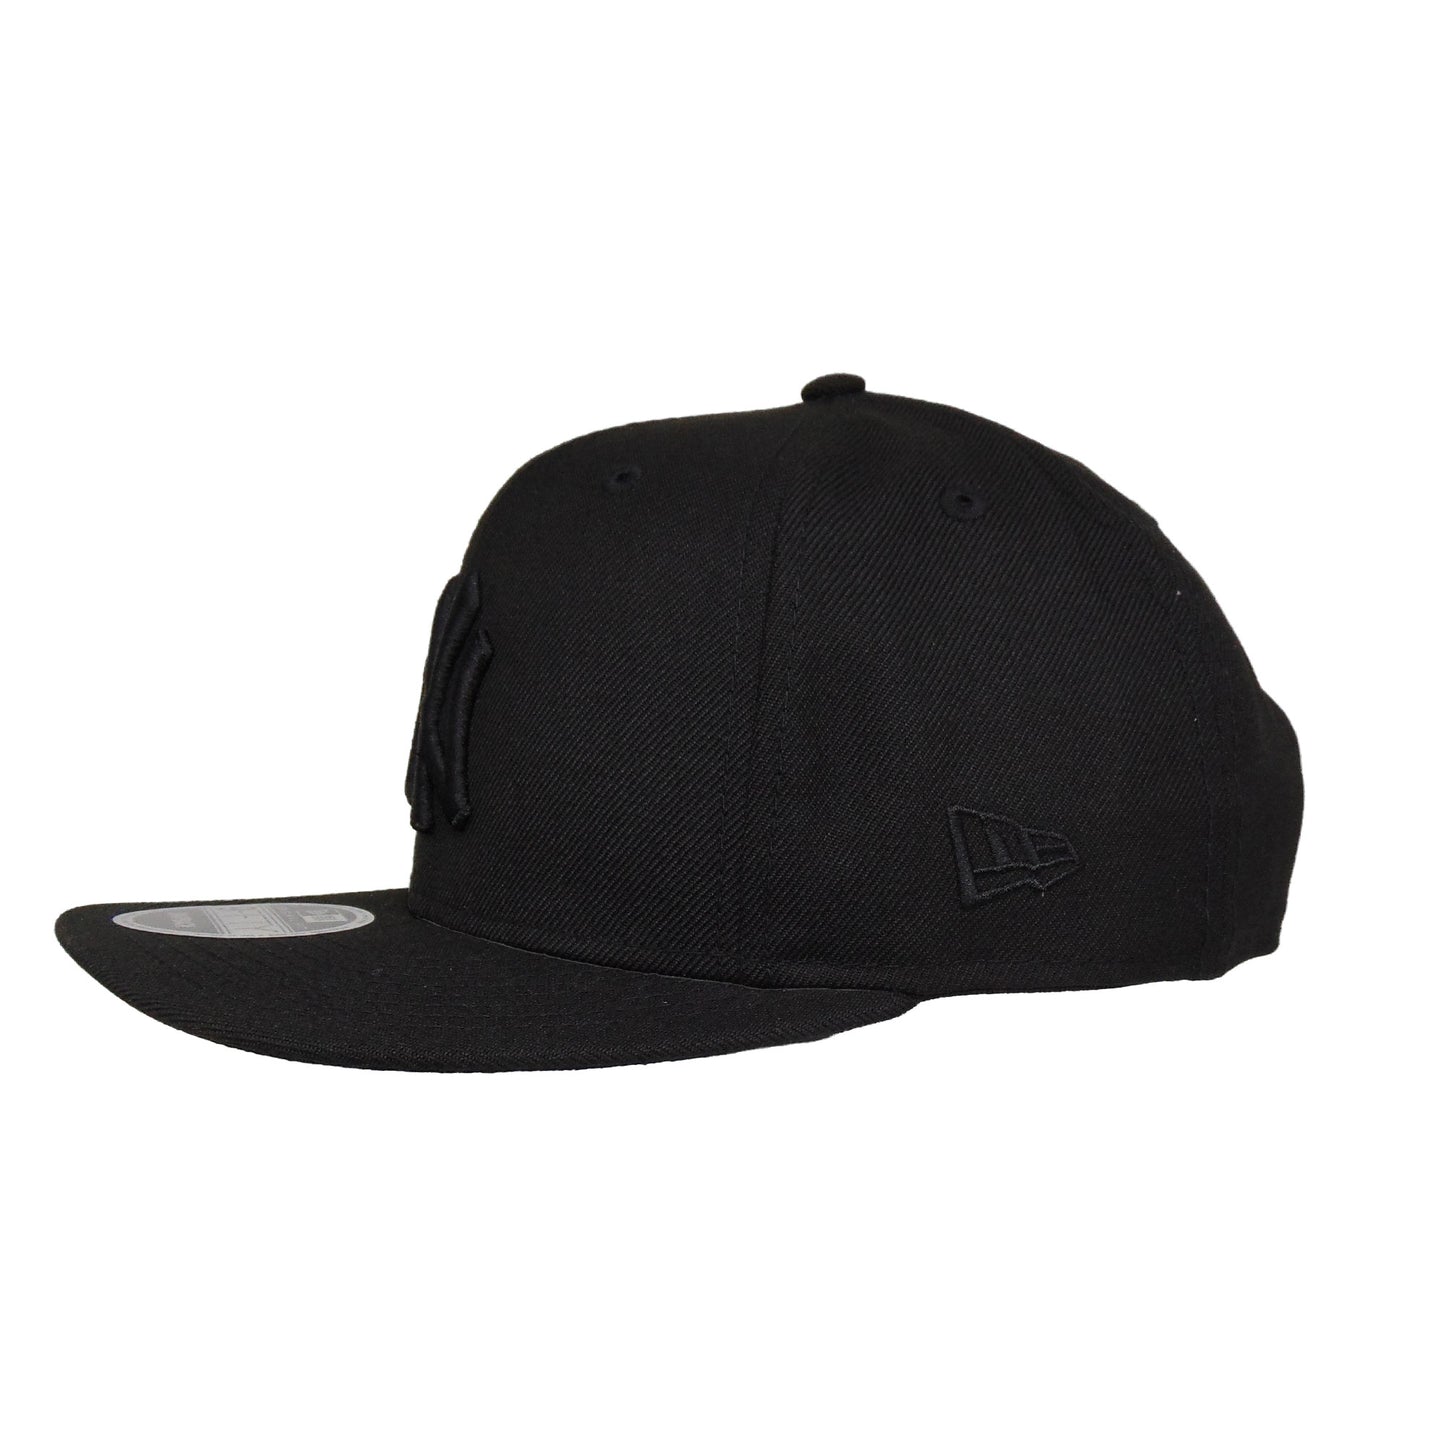 New York Yankees 9FIFTY YOUTH New Era Snap Back Blackout